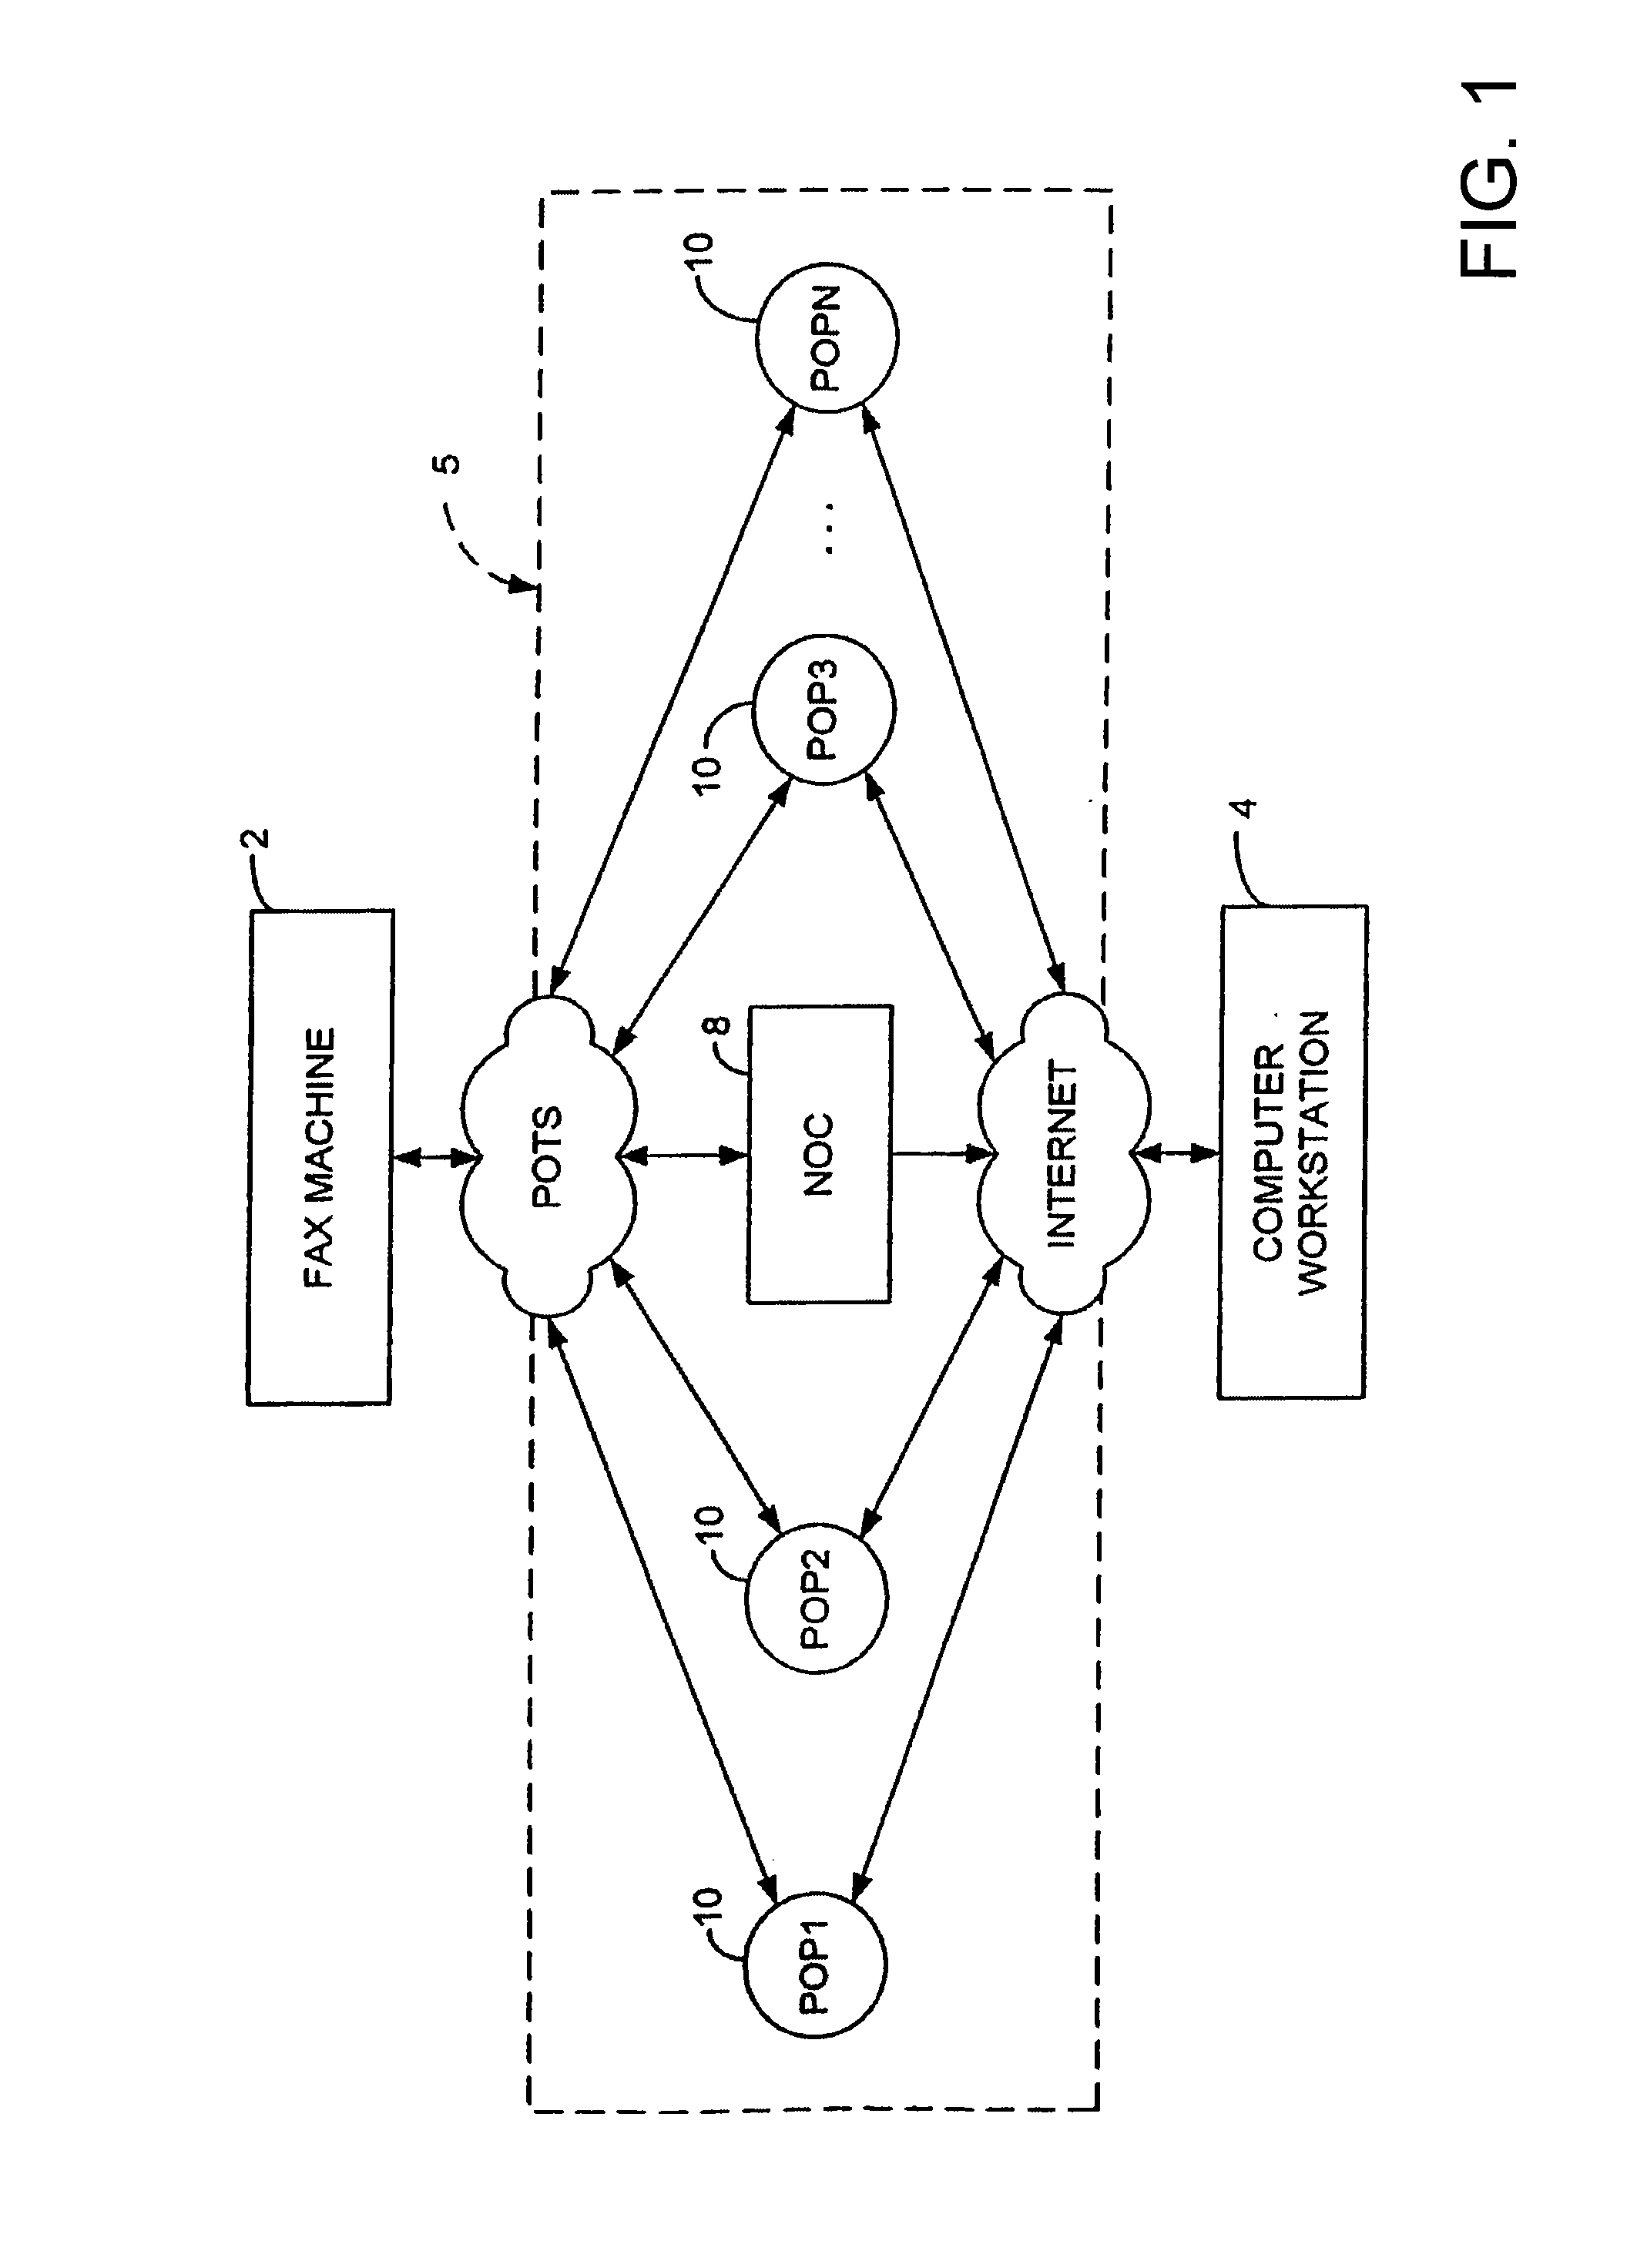 Methods and apparatus for authenticating facsimile transmissions to electronic storage destinations